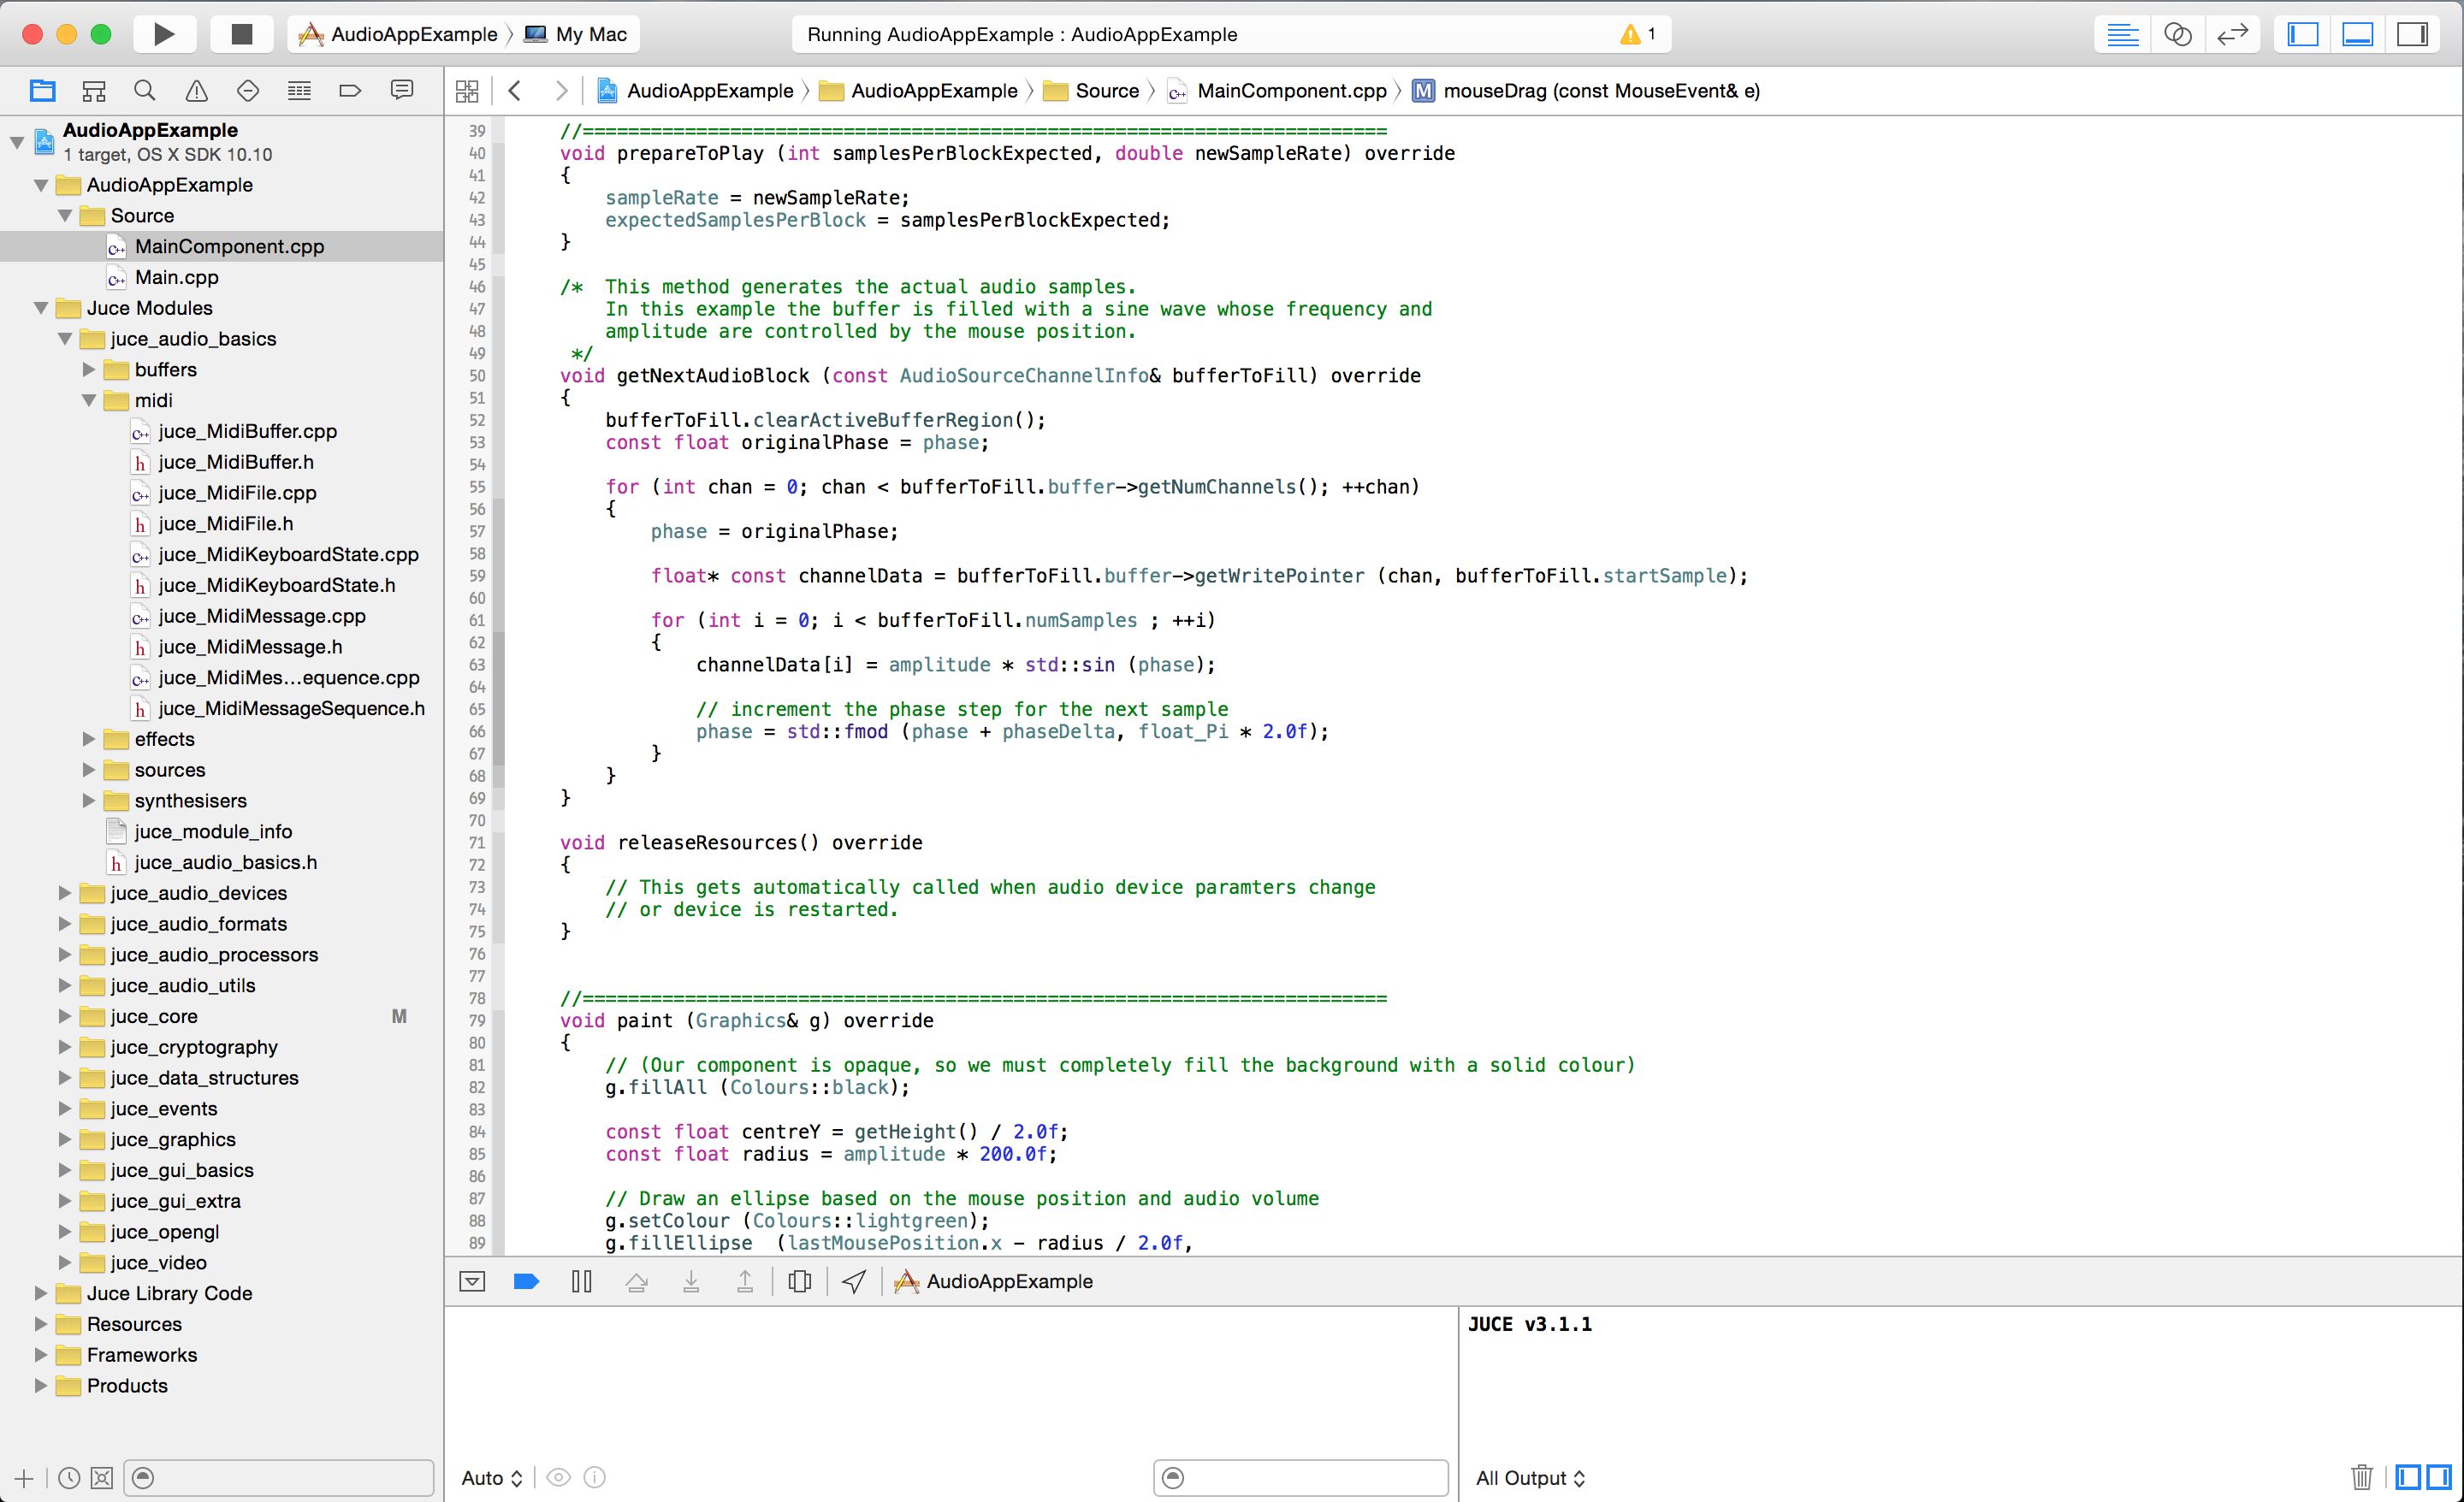 A JUCE project within Apple's Xcode IDE